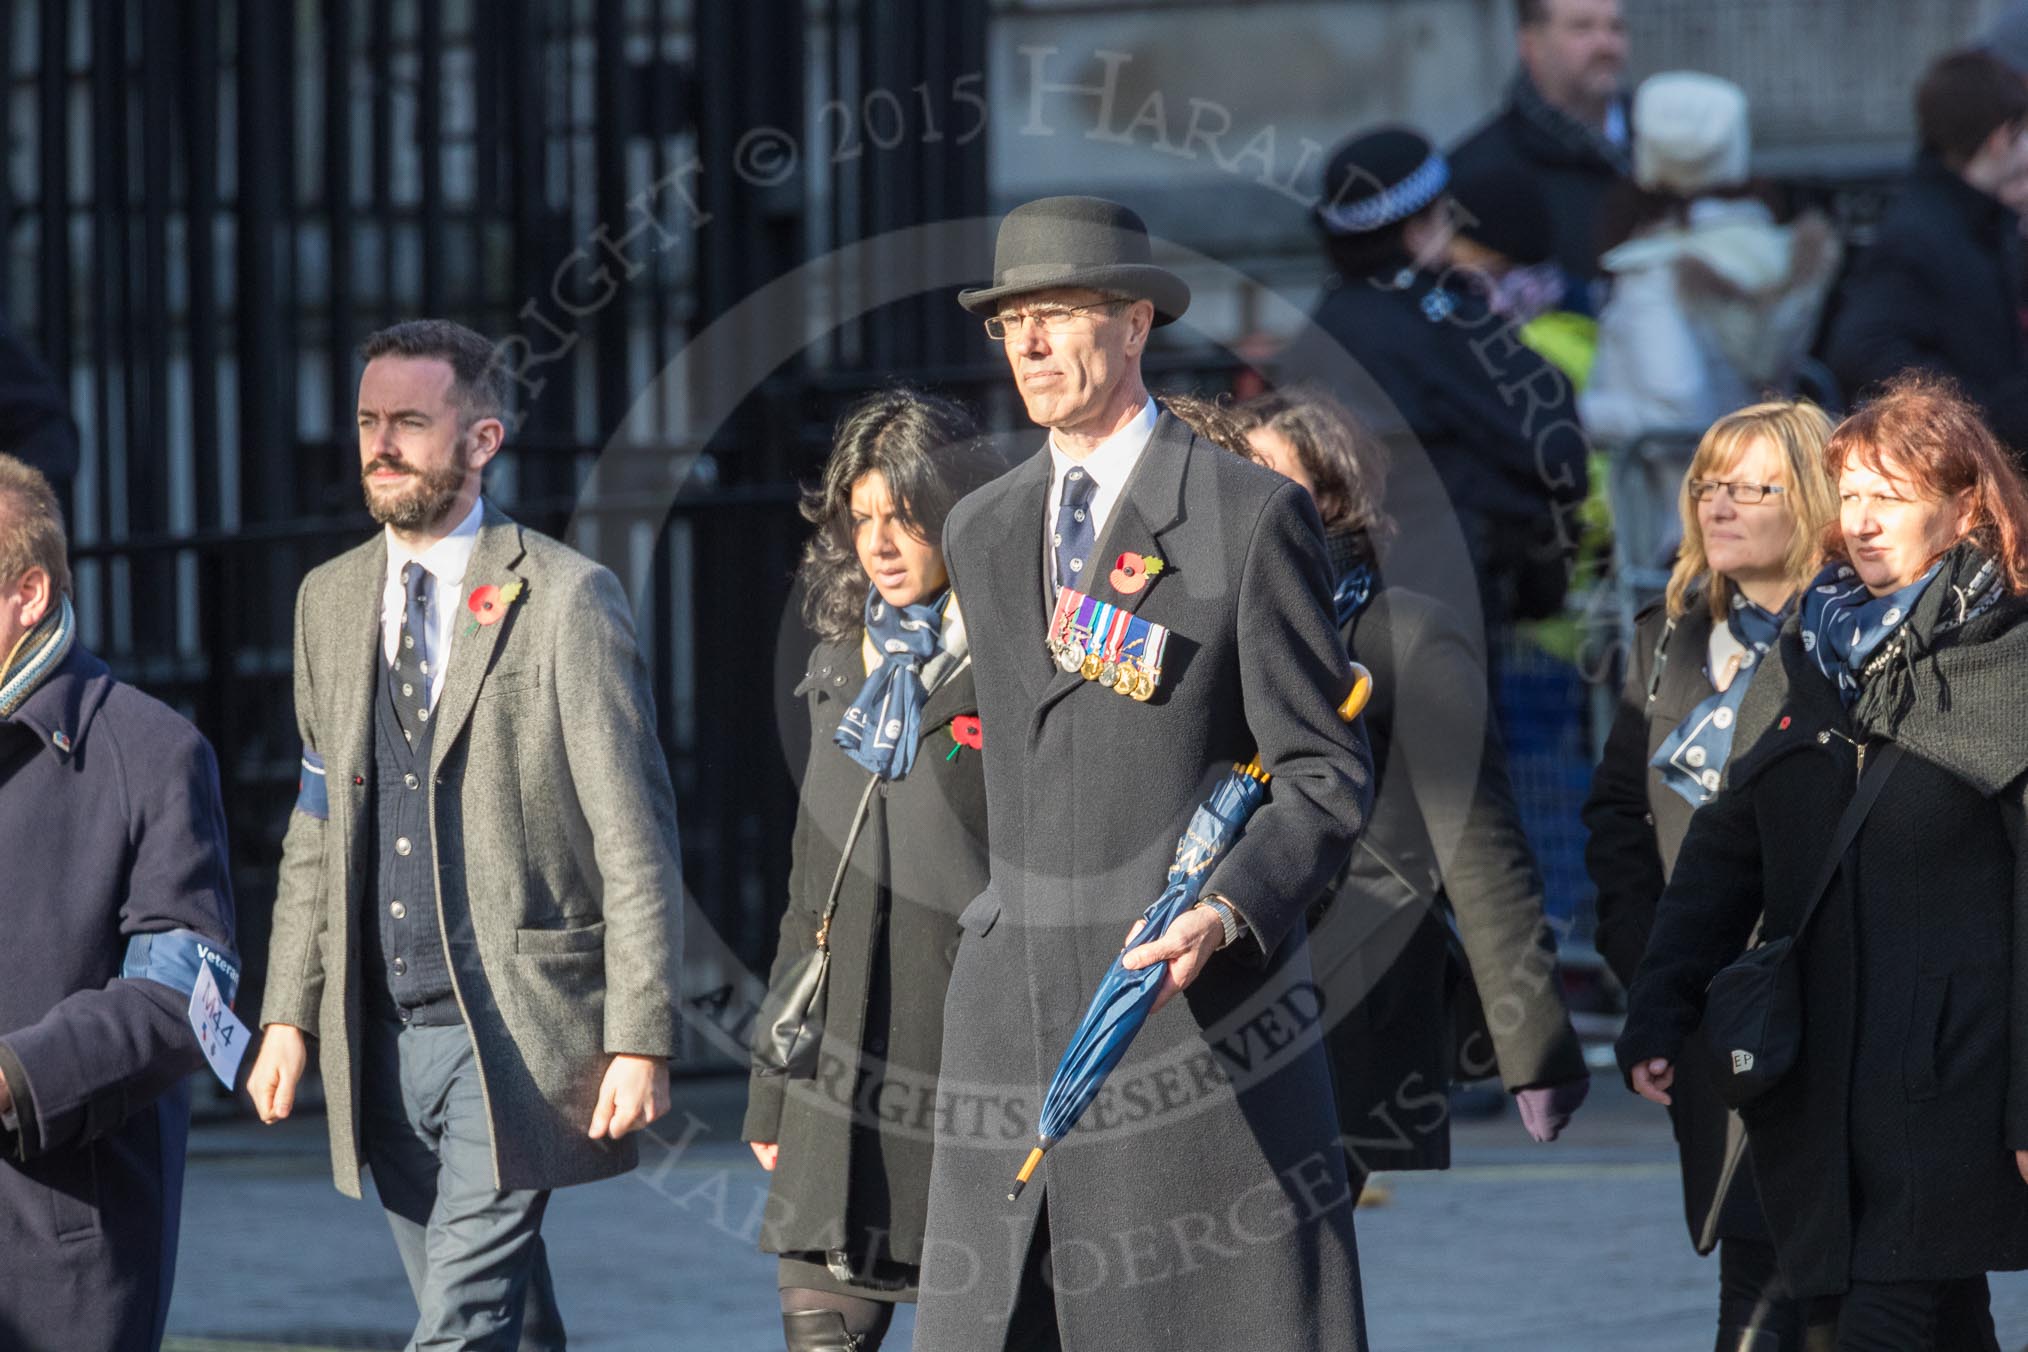 March Past, Remembrance Sunday at the Cenotaph 2016: M46 Commonwealth War Graves Commission.
Cenotaph, Whitehall, London SW1,
London,
Greater London,
United Kingdom,
on 13 November 2016 at 13:19, image #2998